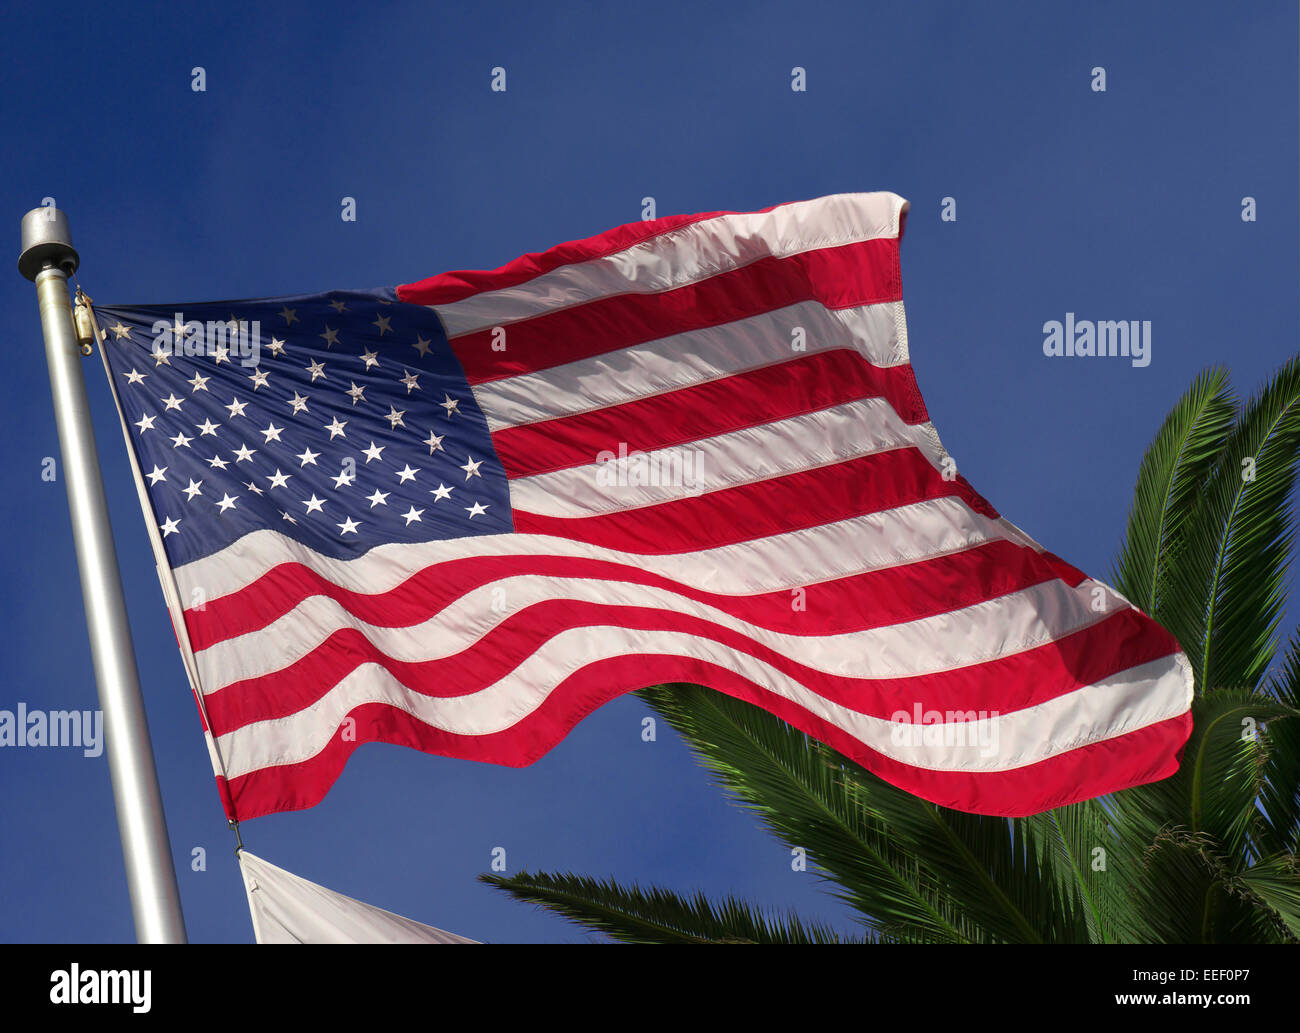 United States Stars and Stripes flag flying in breeze with palm tree fronds behind Stock Photo